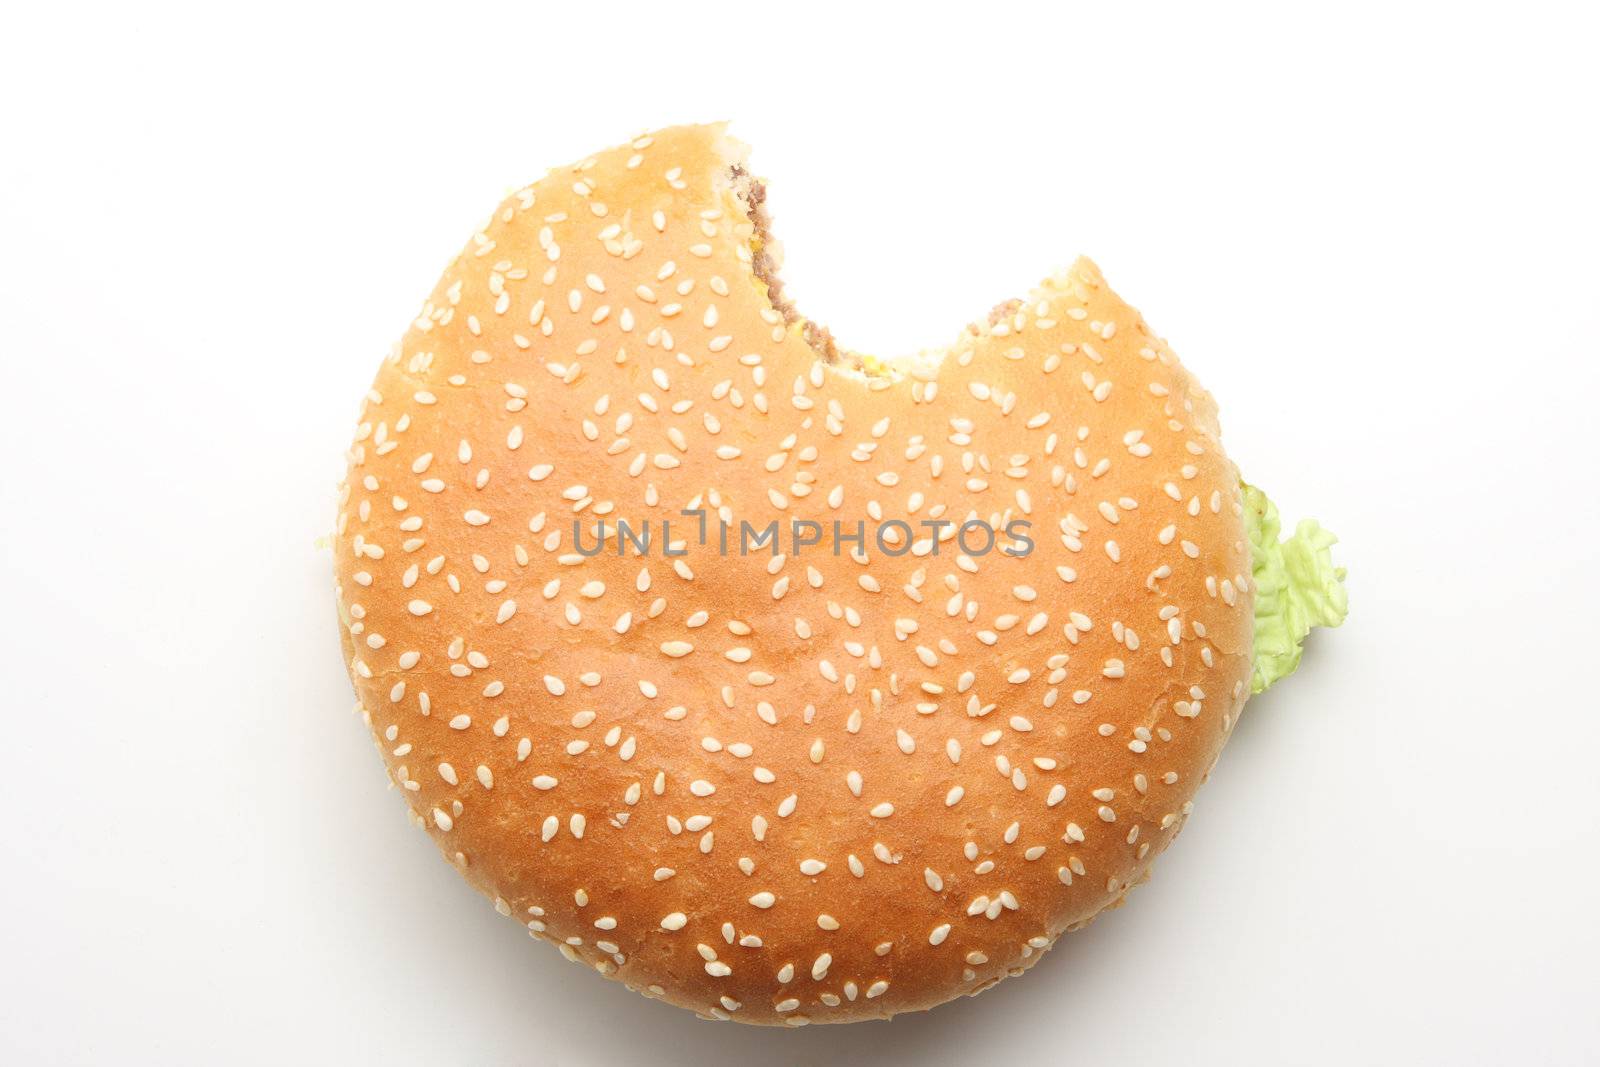 Hamburger isolated on white, one bite taken out of it